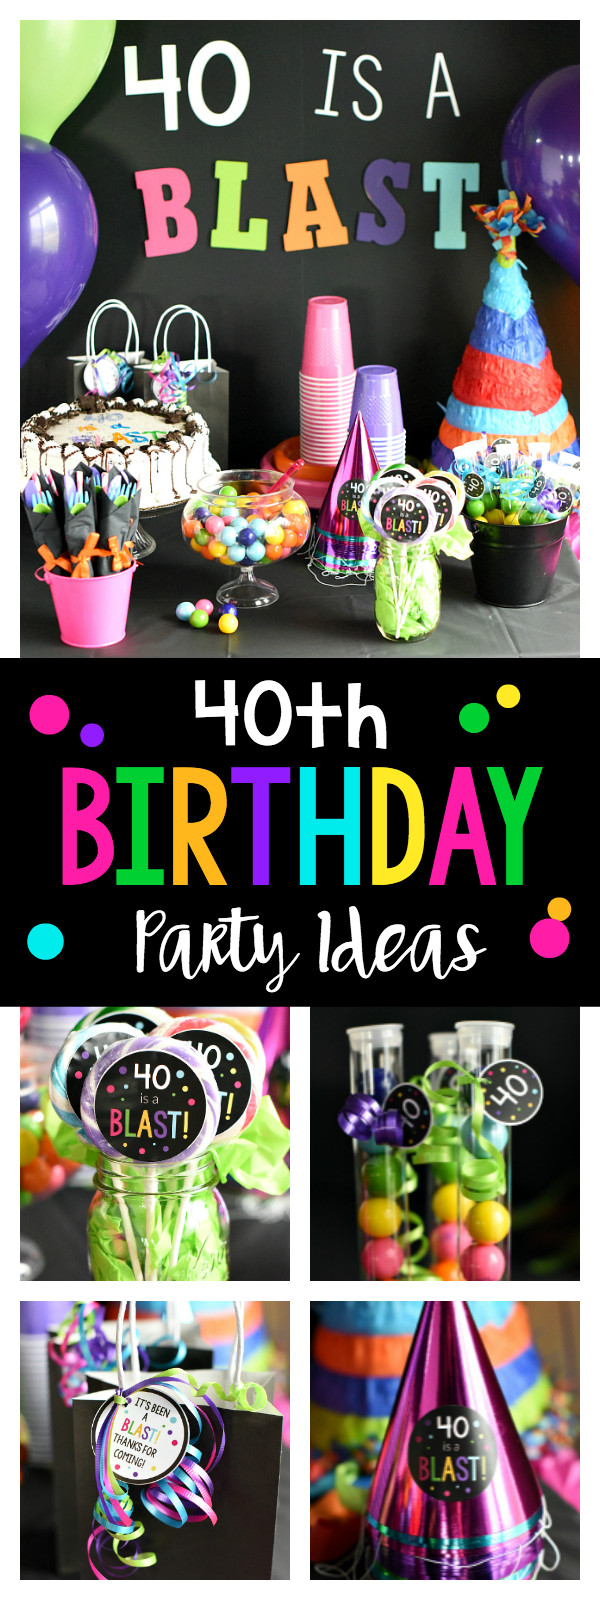 40th Birthday Party Activities
 40th Birthday Party 40 is a Blast – Fun Squared